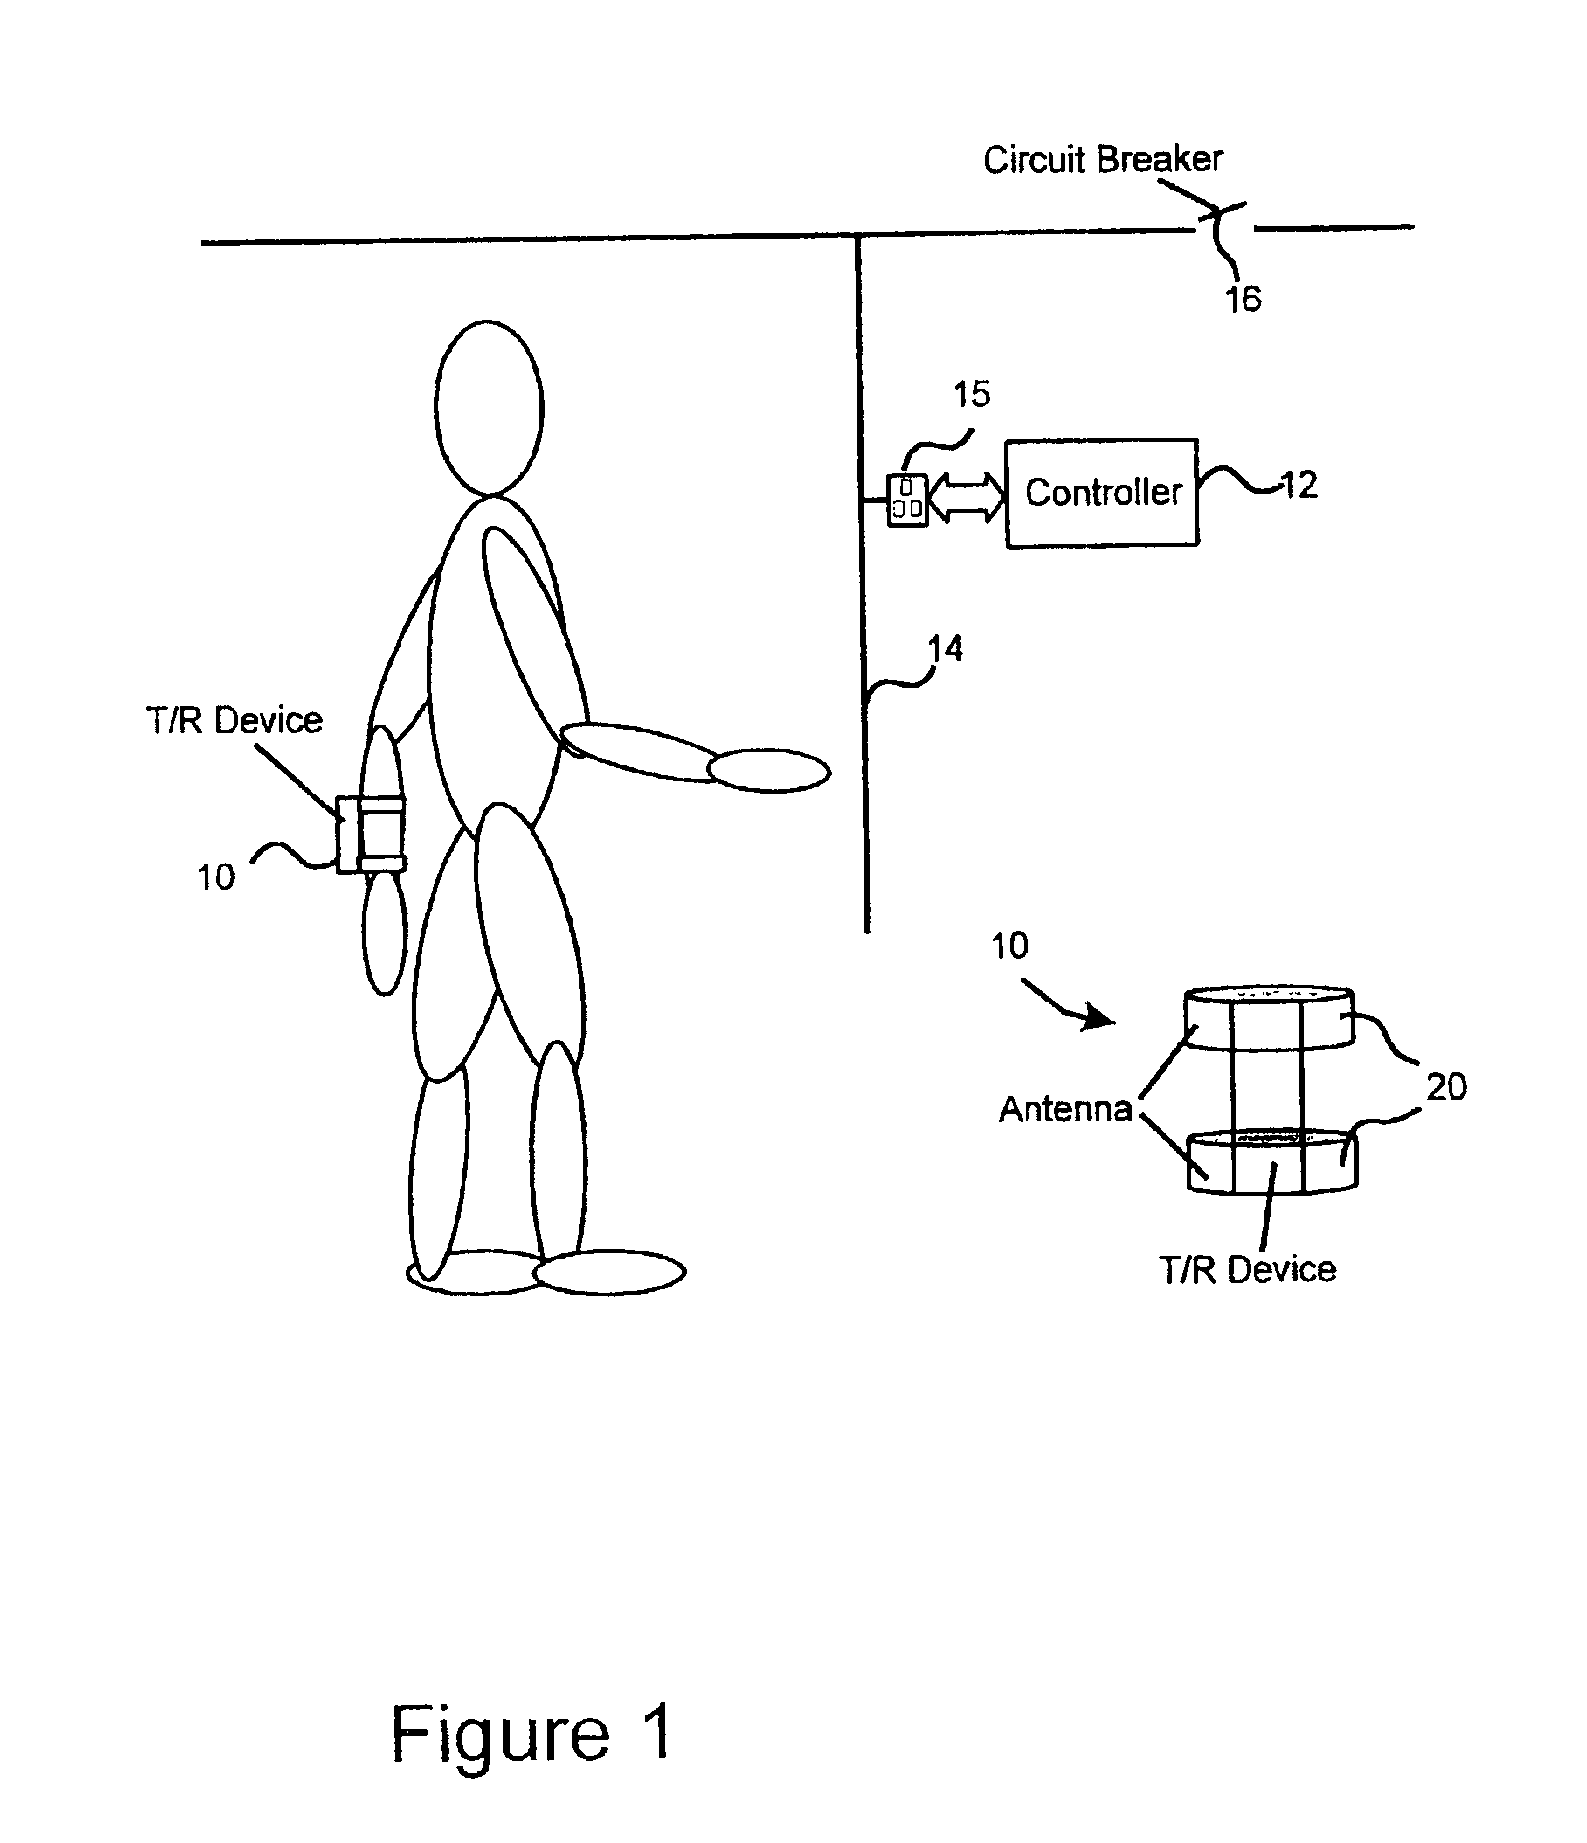 Electrical injury protection system using radio frequency transmission